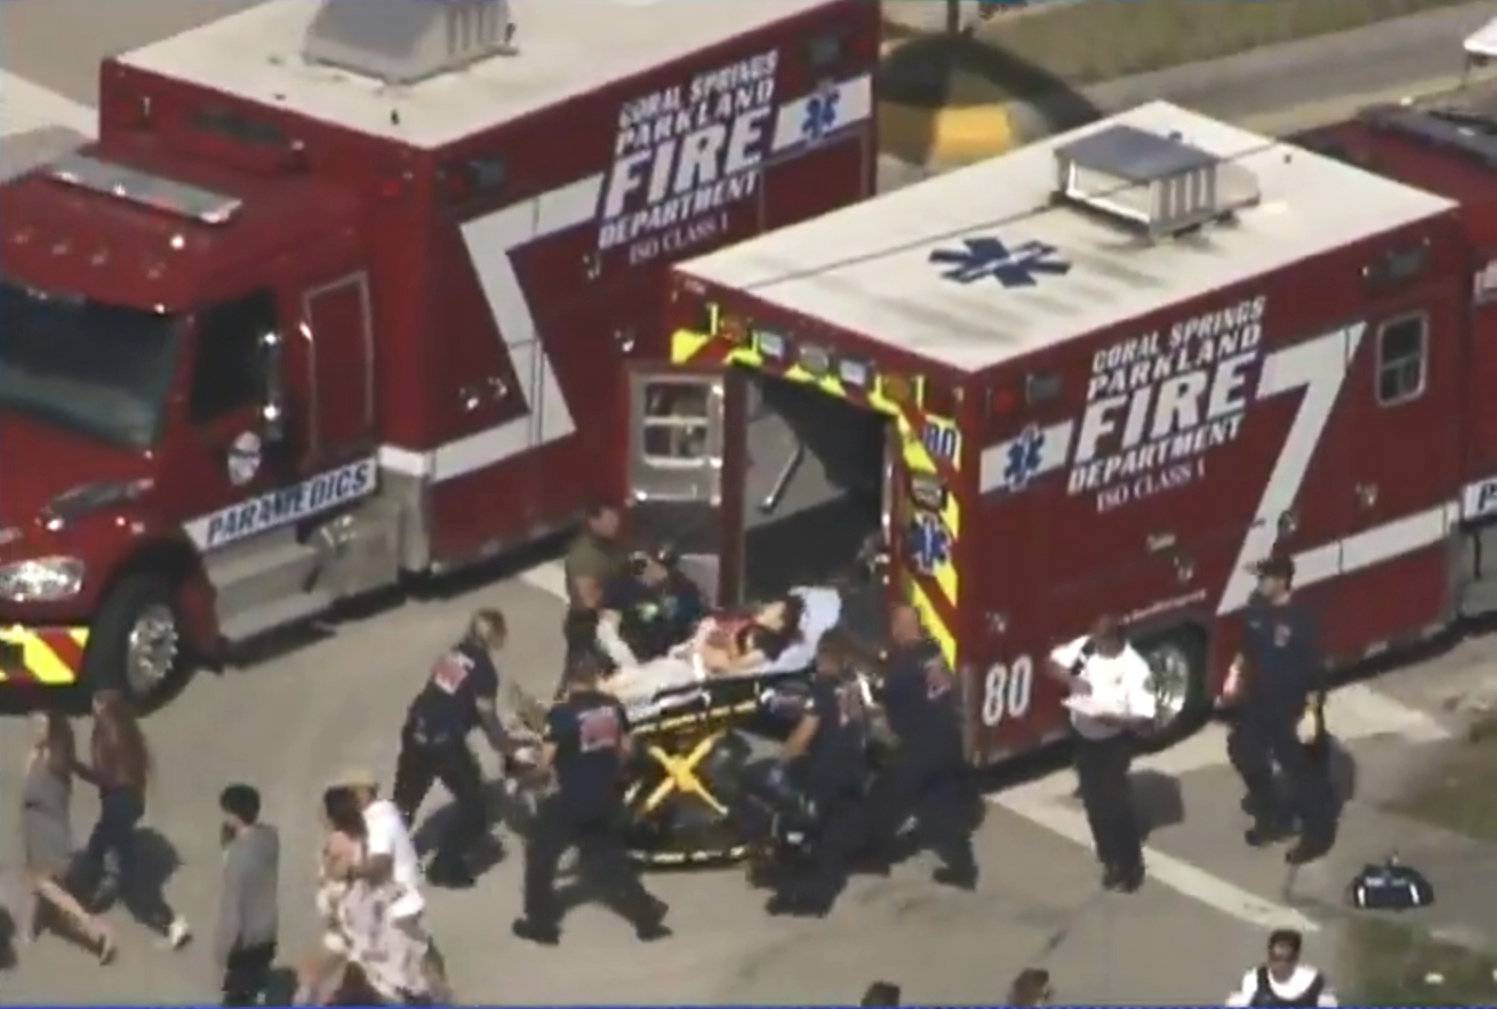 Rescue workers prepare to transport a victim on a stretcher near Marjory Stoneman Douglas High School following a shooting incident in Parkland